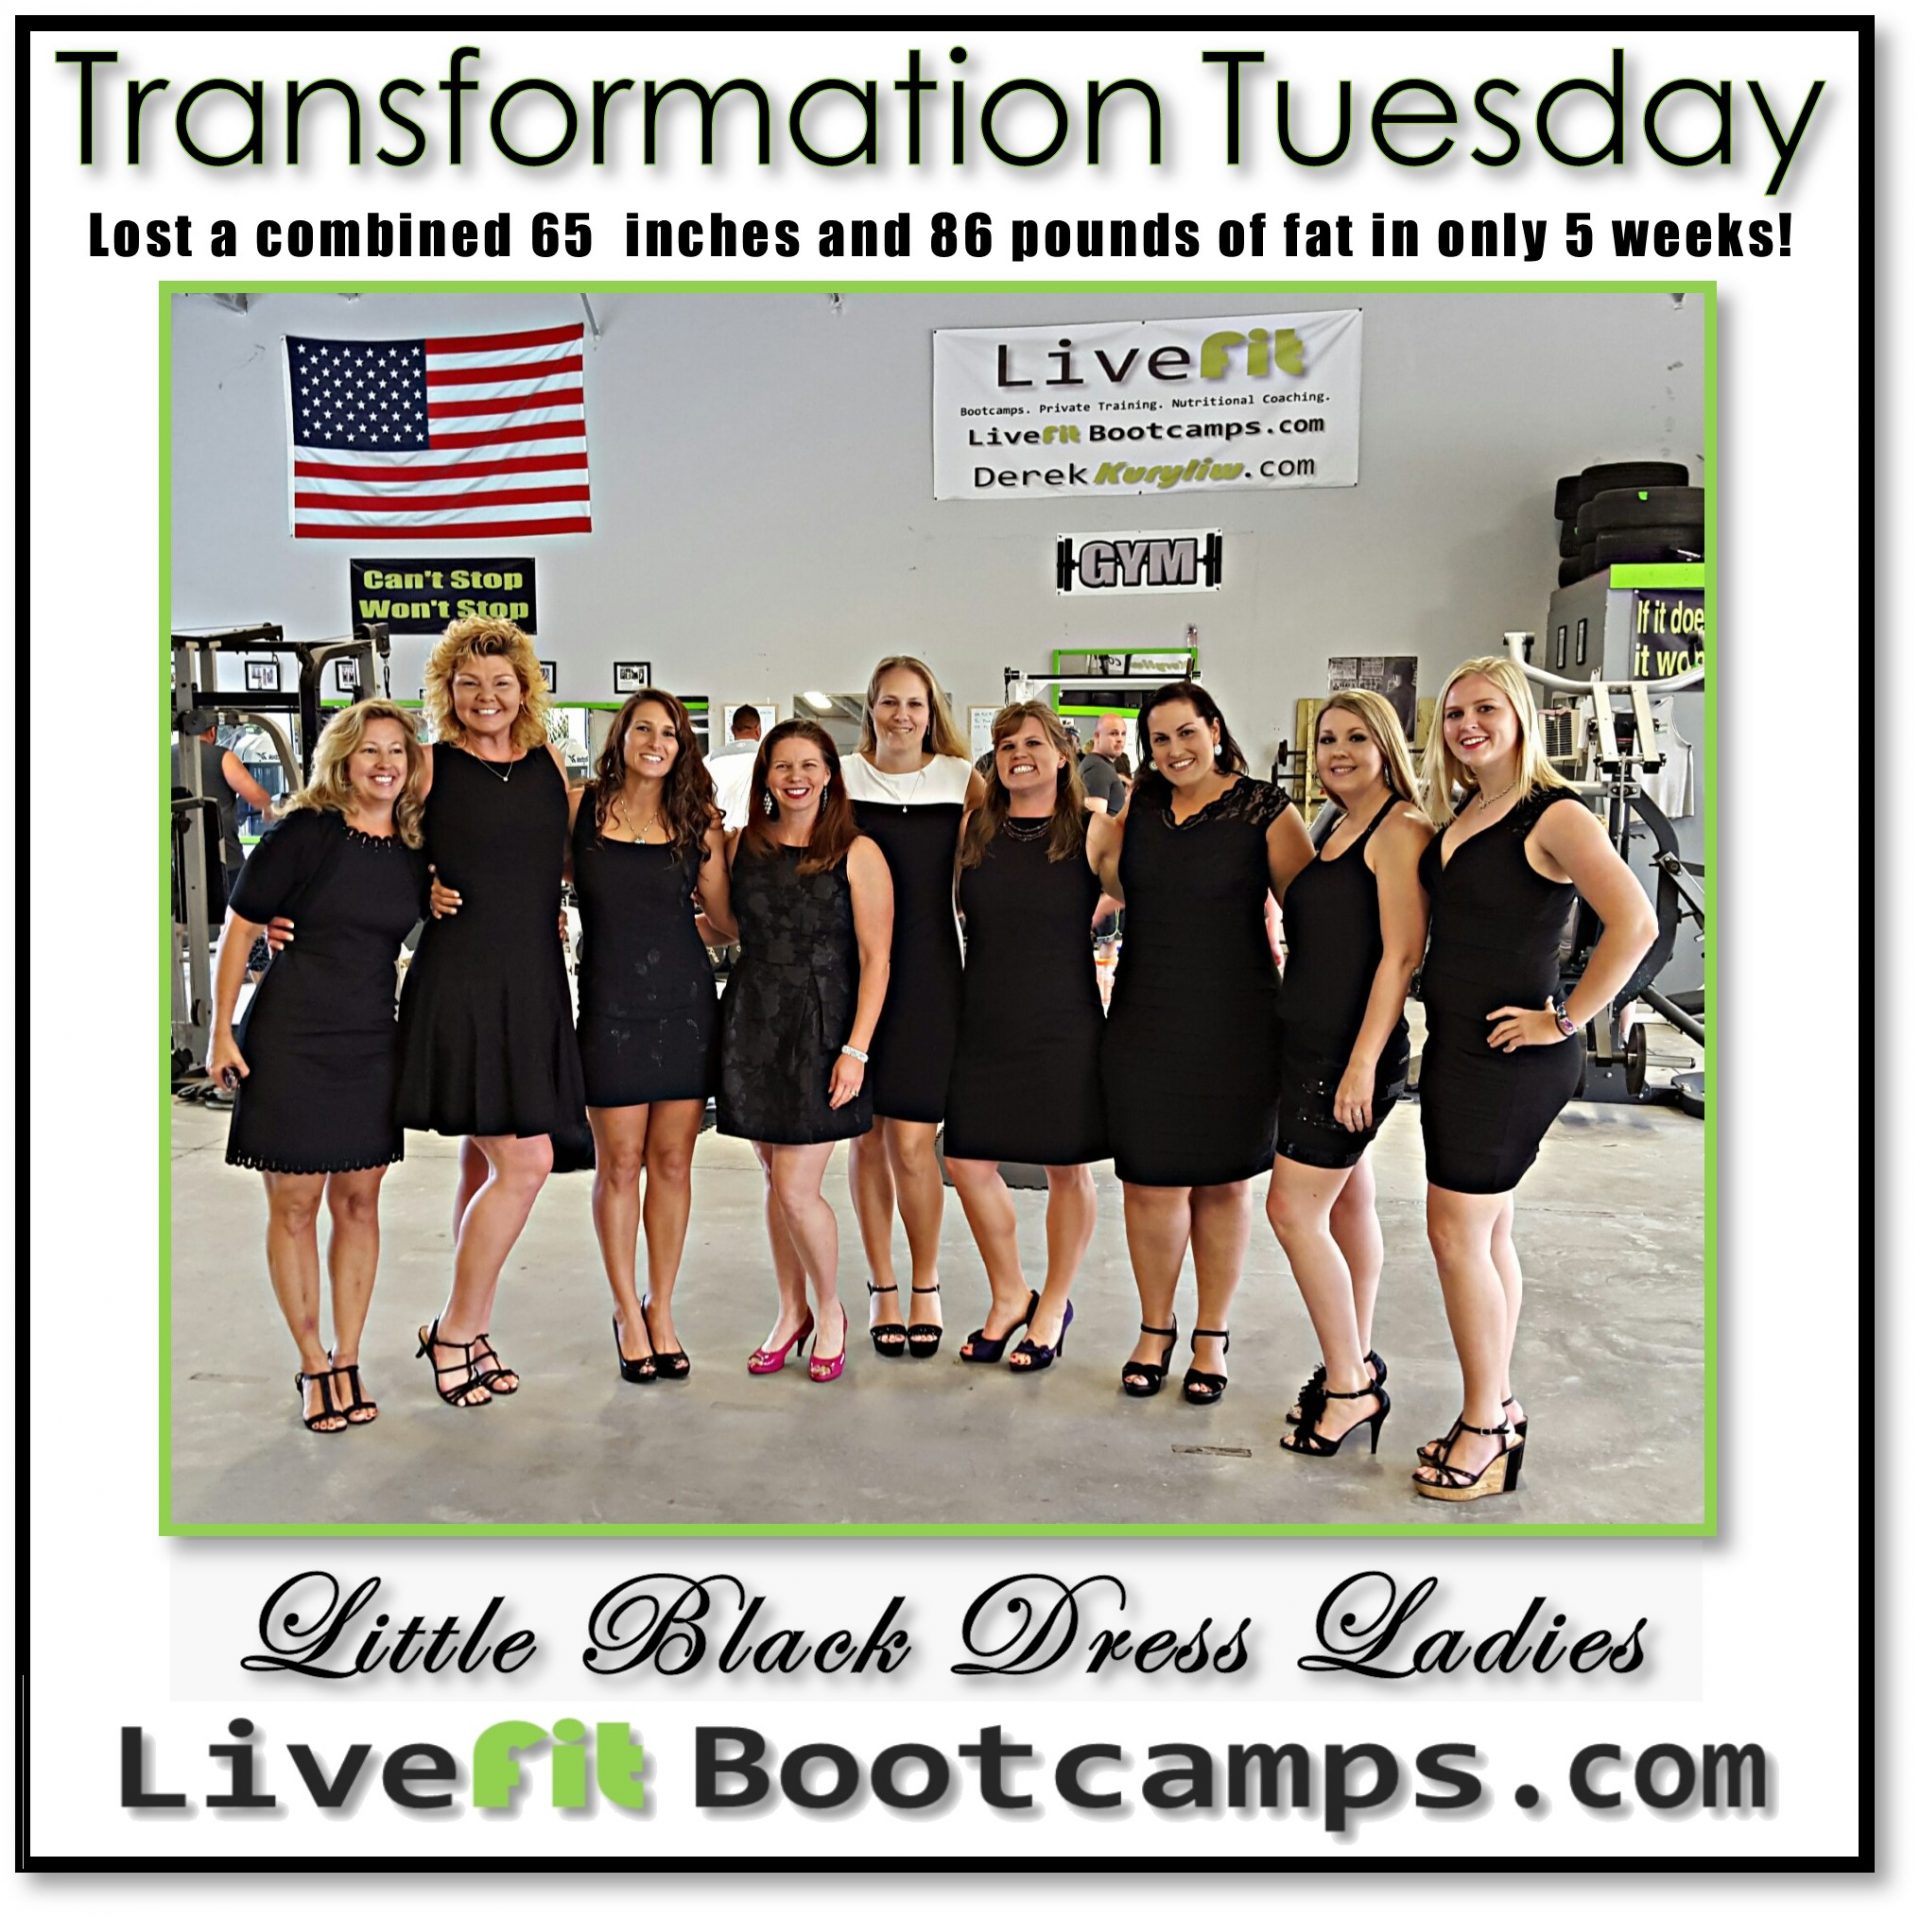 Turns heads and gain confidence in just 5 weeks! (LBD #3)